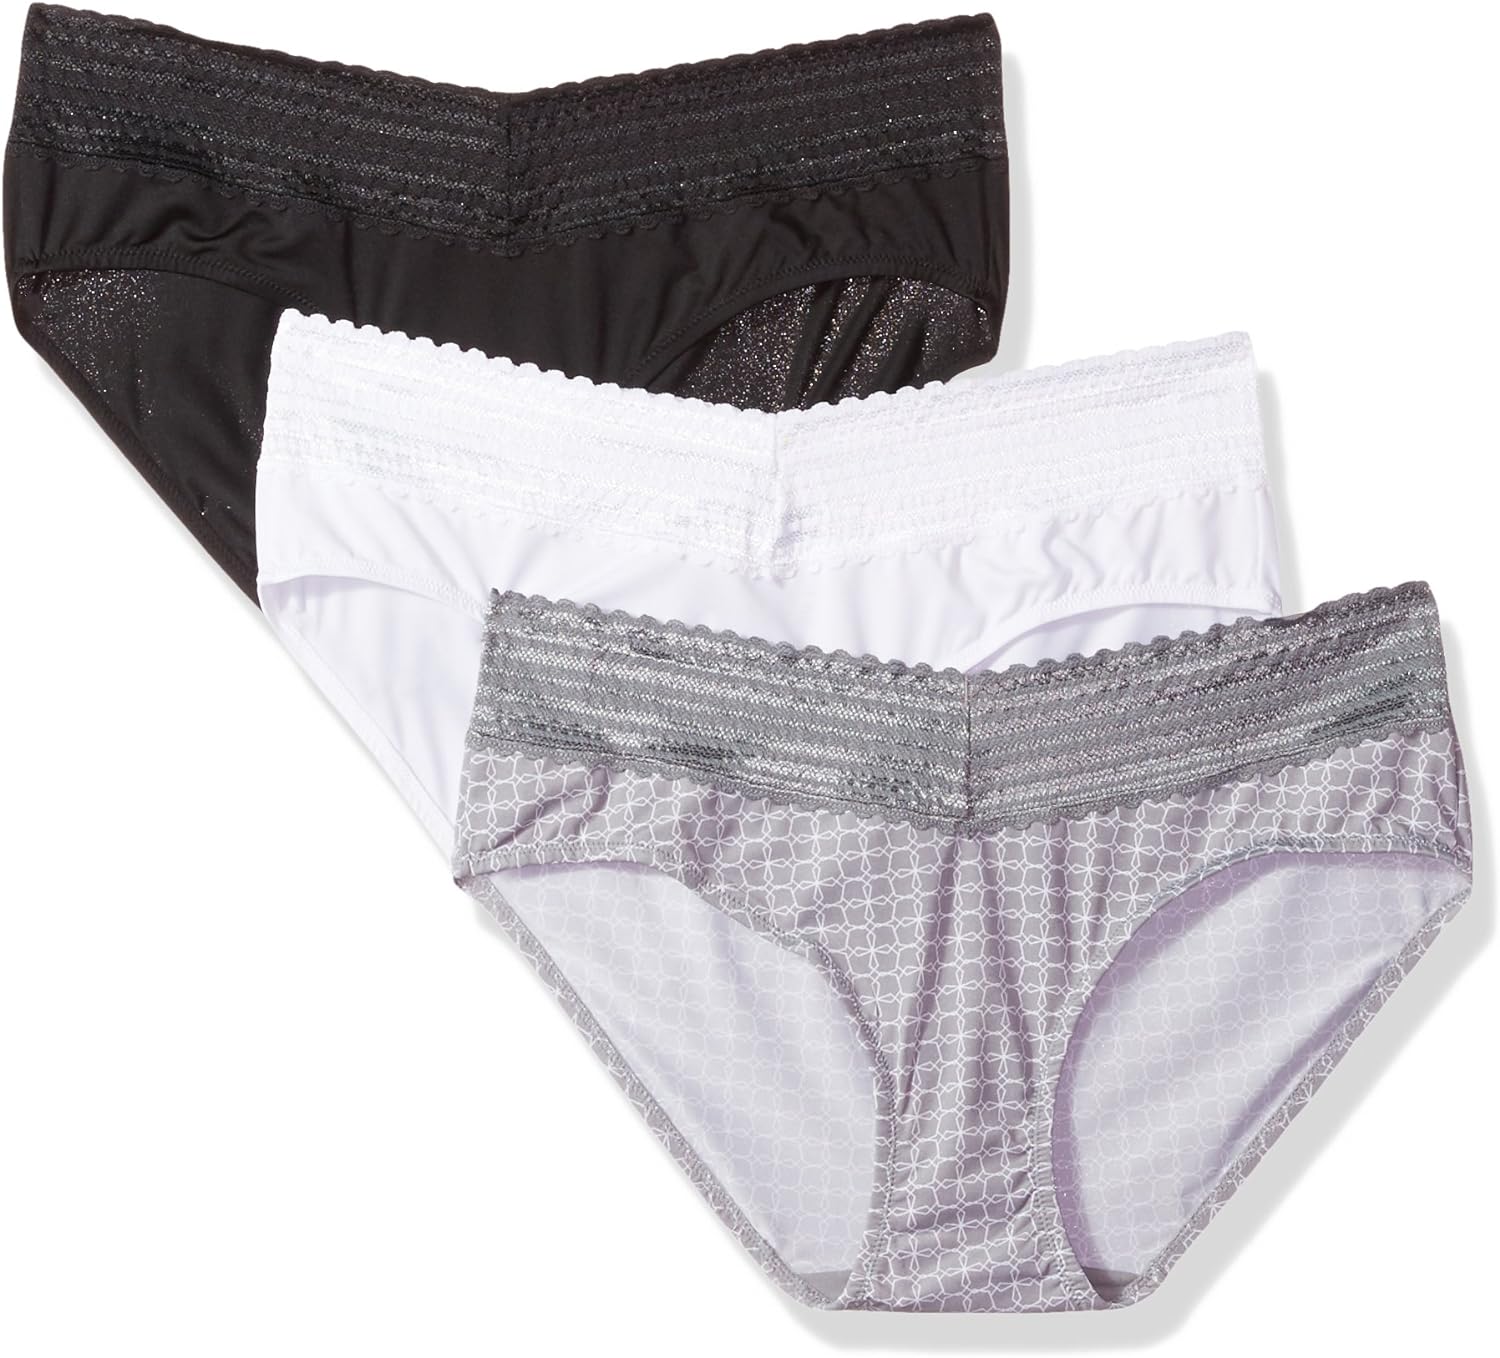 Warner's Womens Blissful Benefits No Muffin 3 Pack Hipster Panties